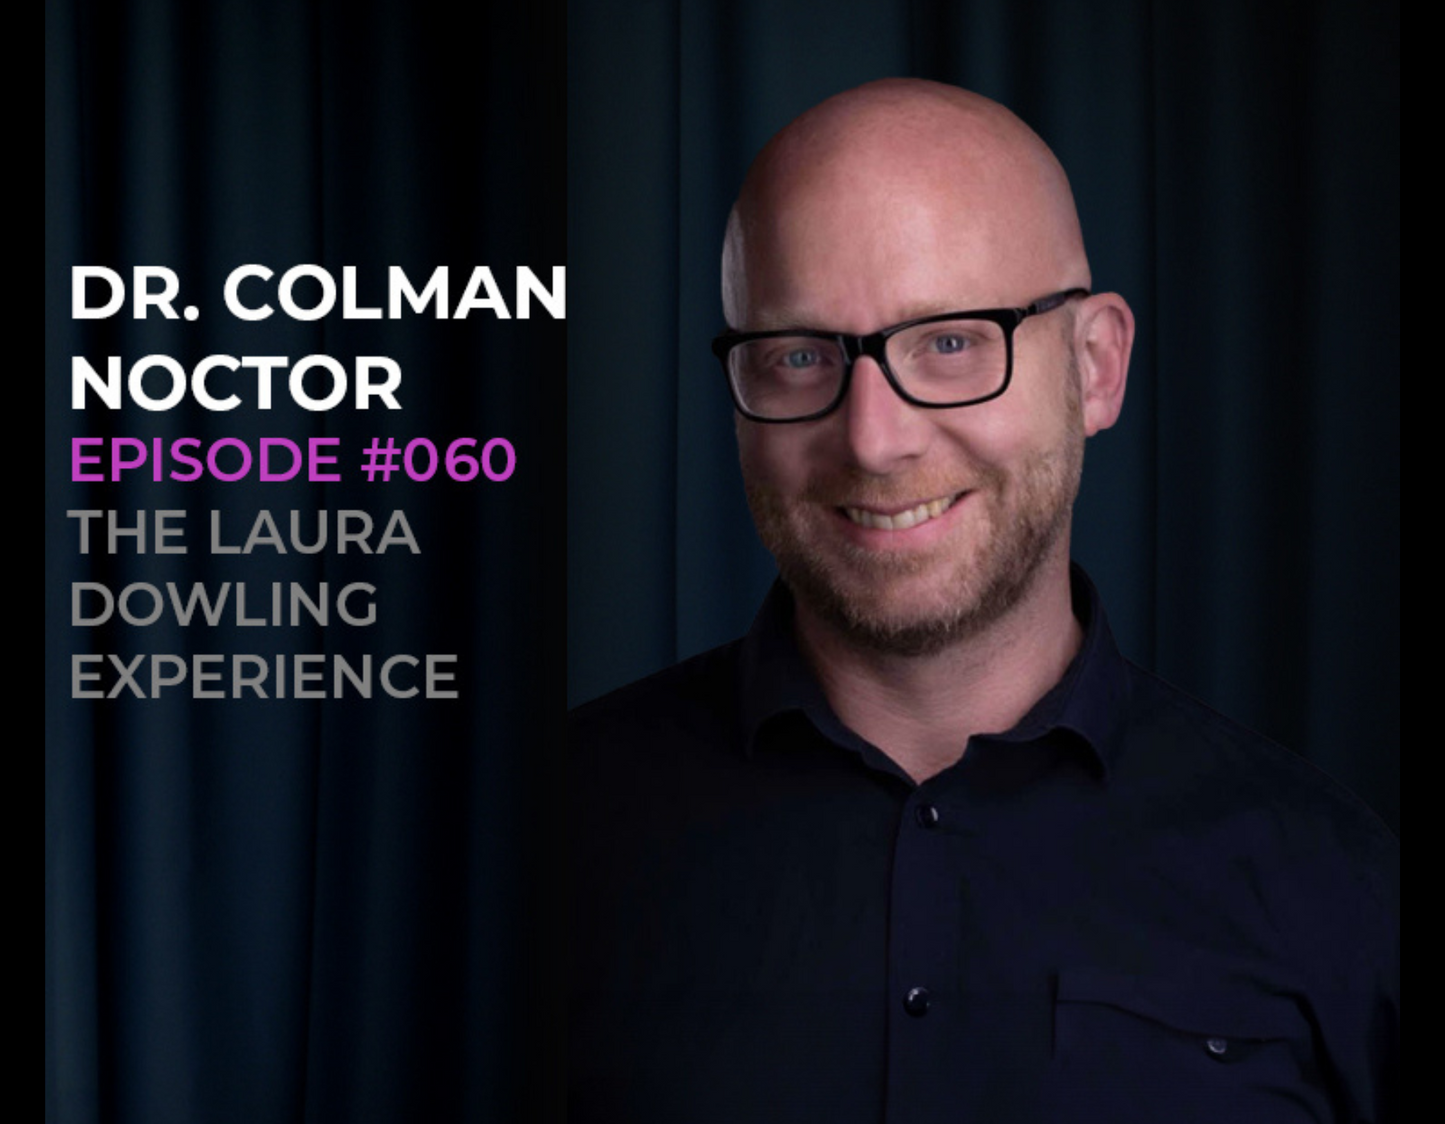 Dr. Coleman Noctor, psychotherapist. The pressure to always feel 10/10, anxiety in kids and teens, and what society places importance on...it's not all about the tinder profile! #060